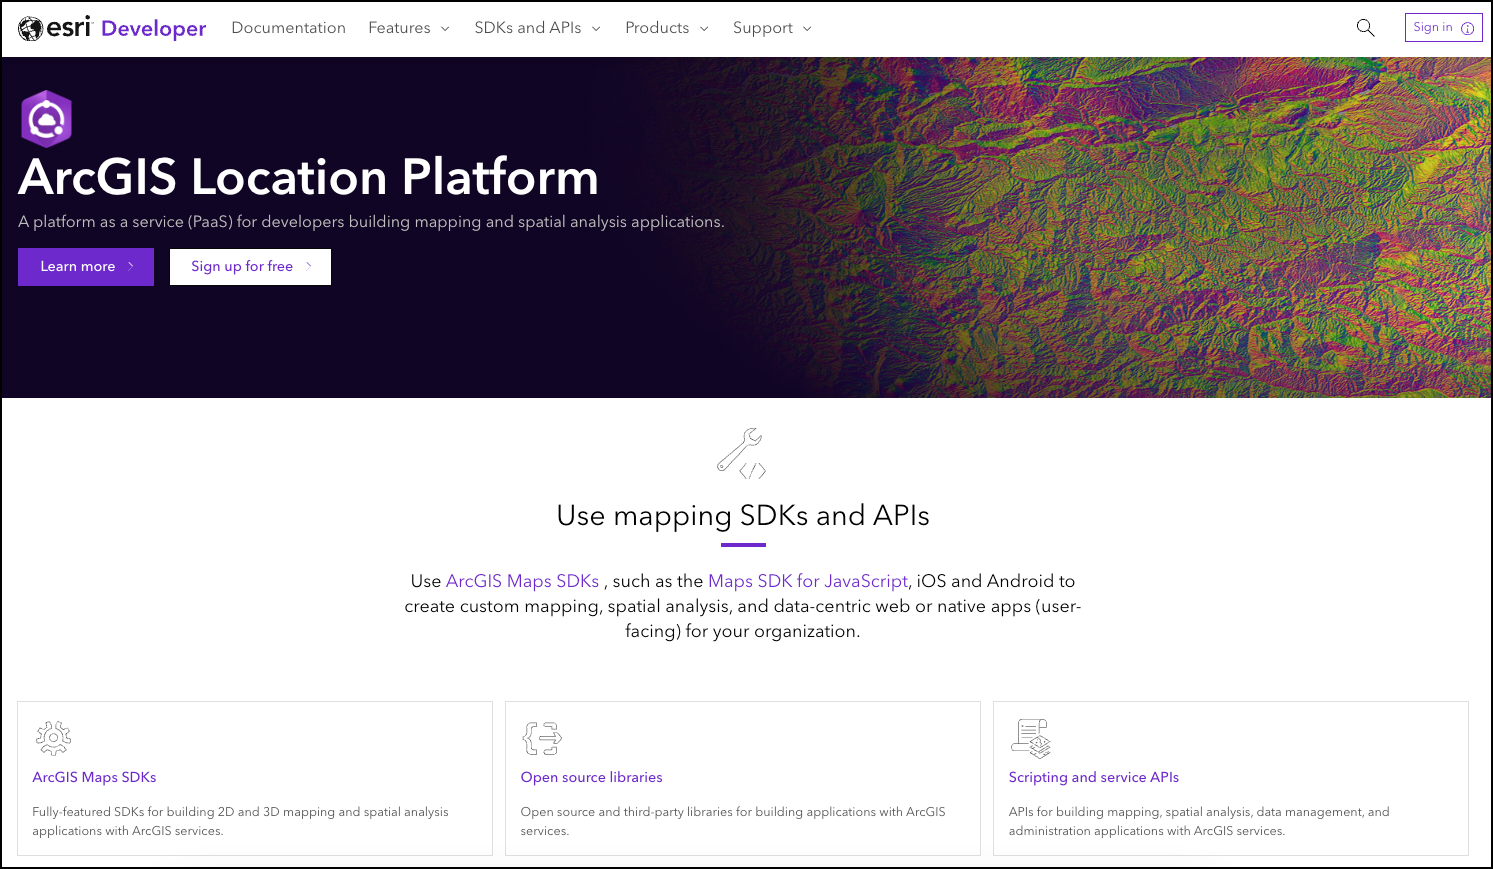 Screenshot of the Esri Developer Documentation page focused on AccGIS Location Platform section of how to use mapping SDKs and APIs